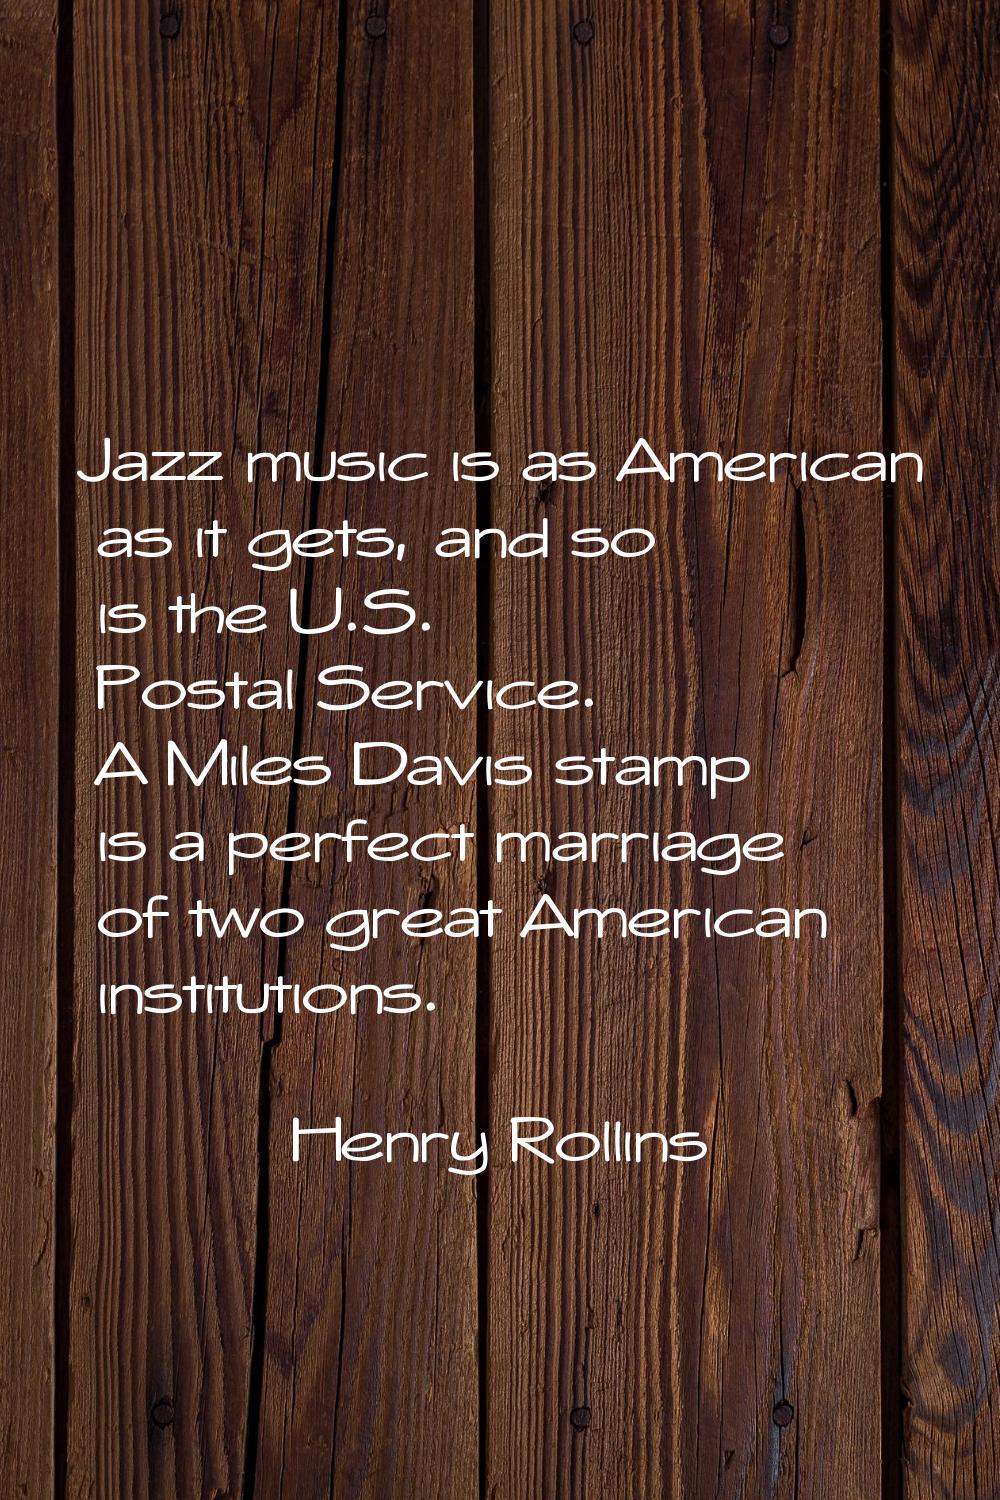 Jazz music is as American as it gets, and so is the U.S. Postal Service. A Miles Davis stamp is a p